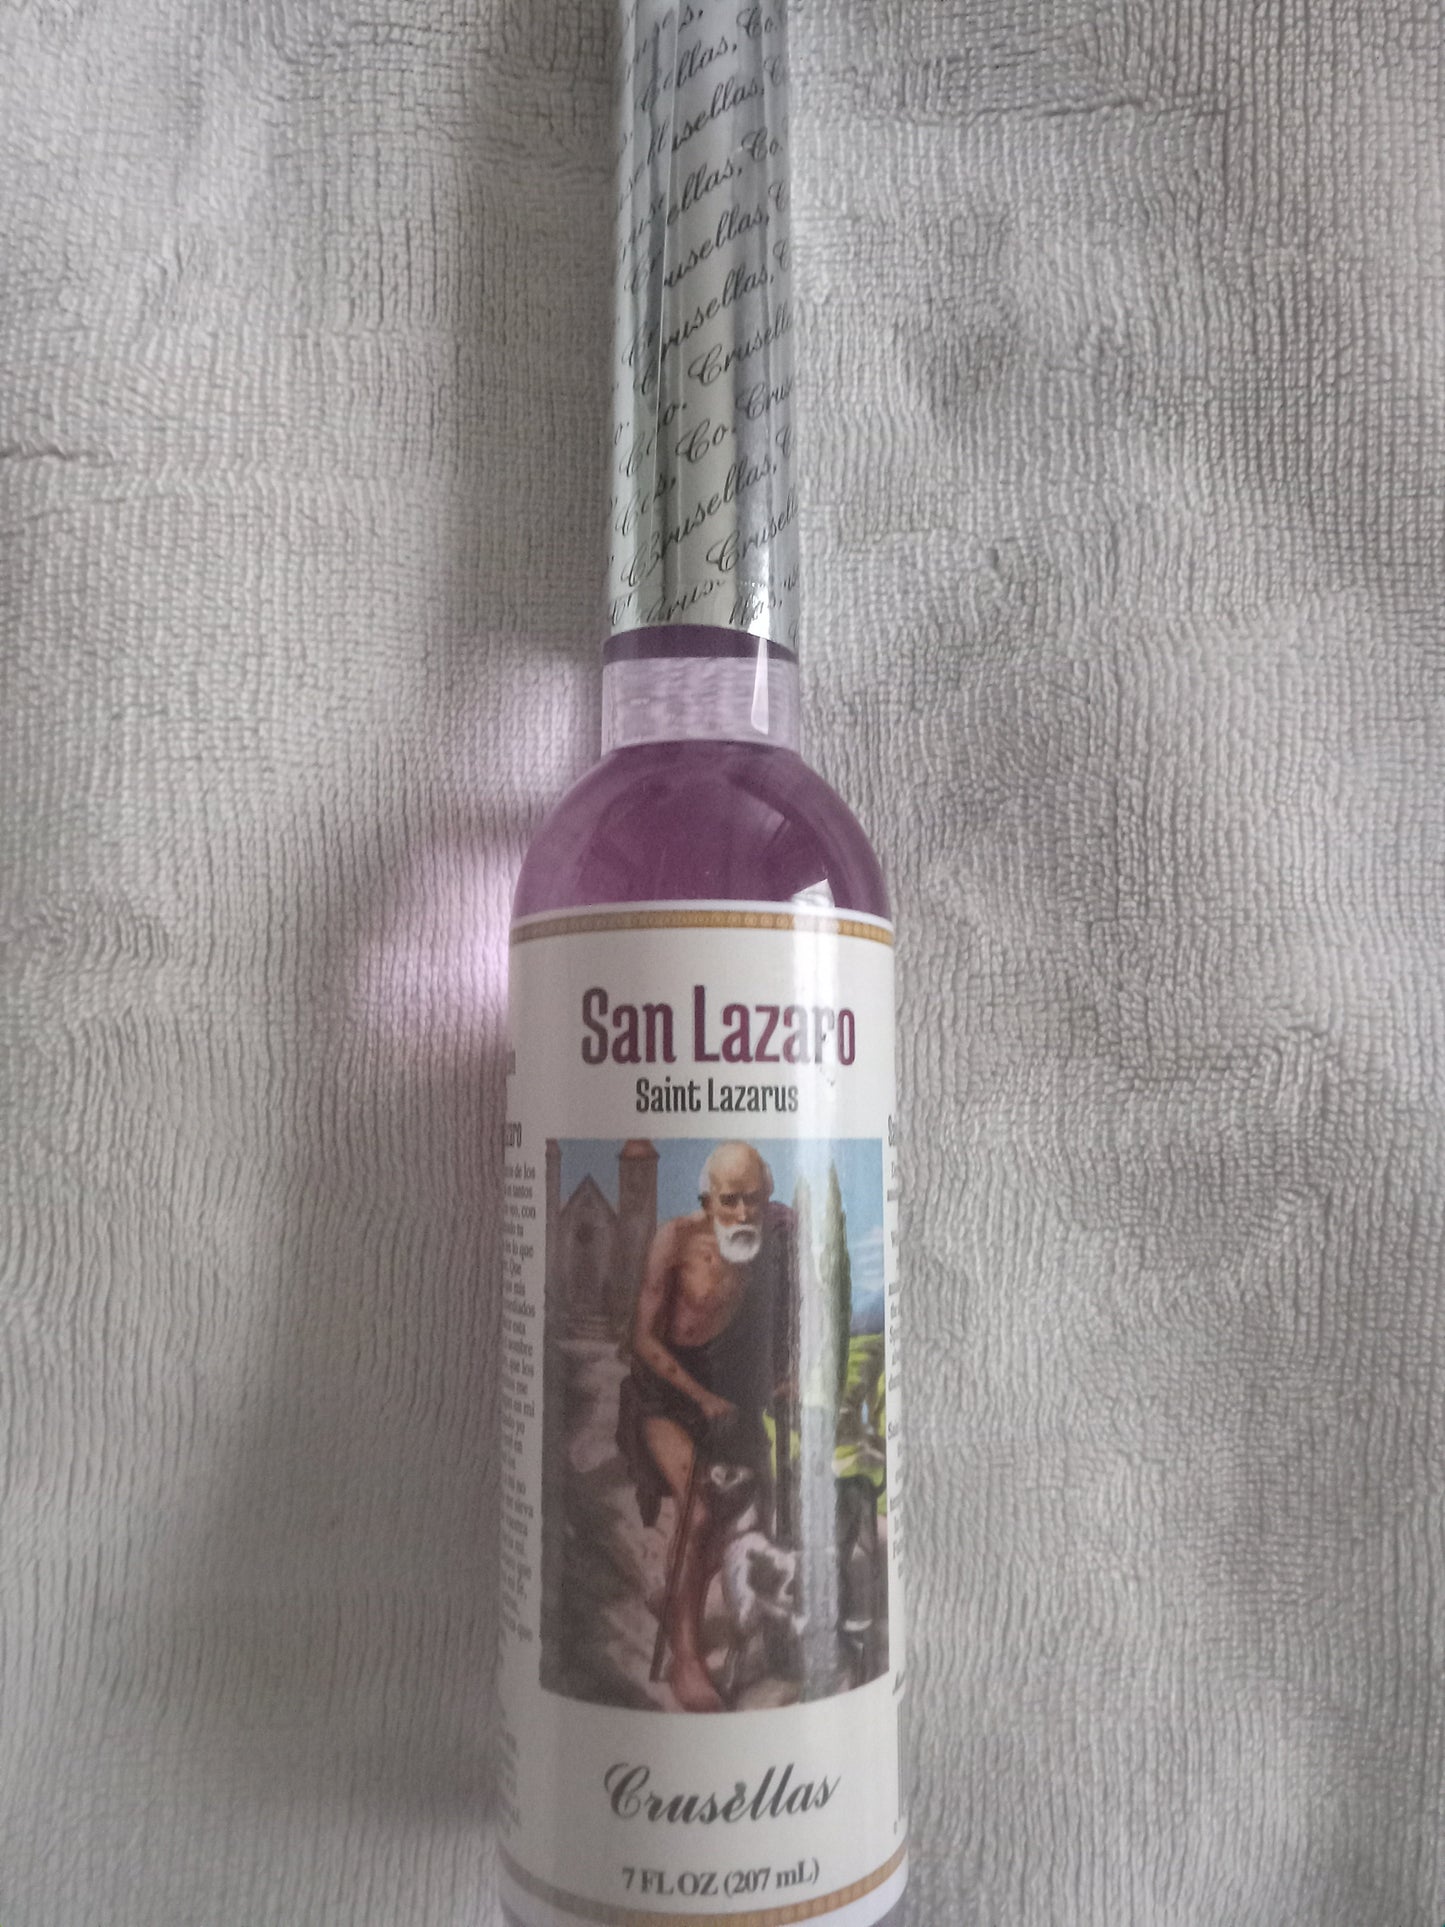  Saint Lazarus Cologne -  available at Amazing Creations Products . Grab yours for $8.50 today!